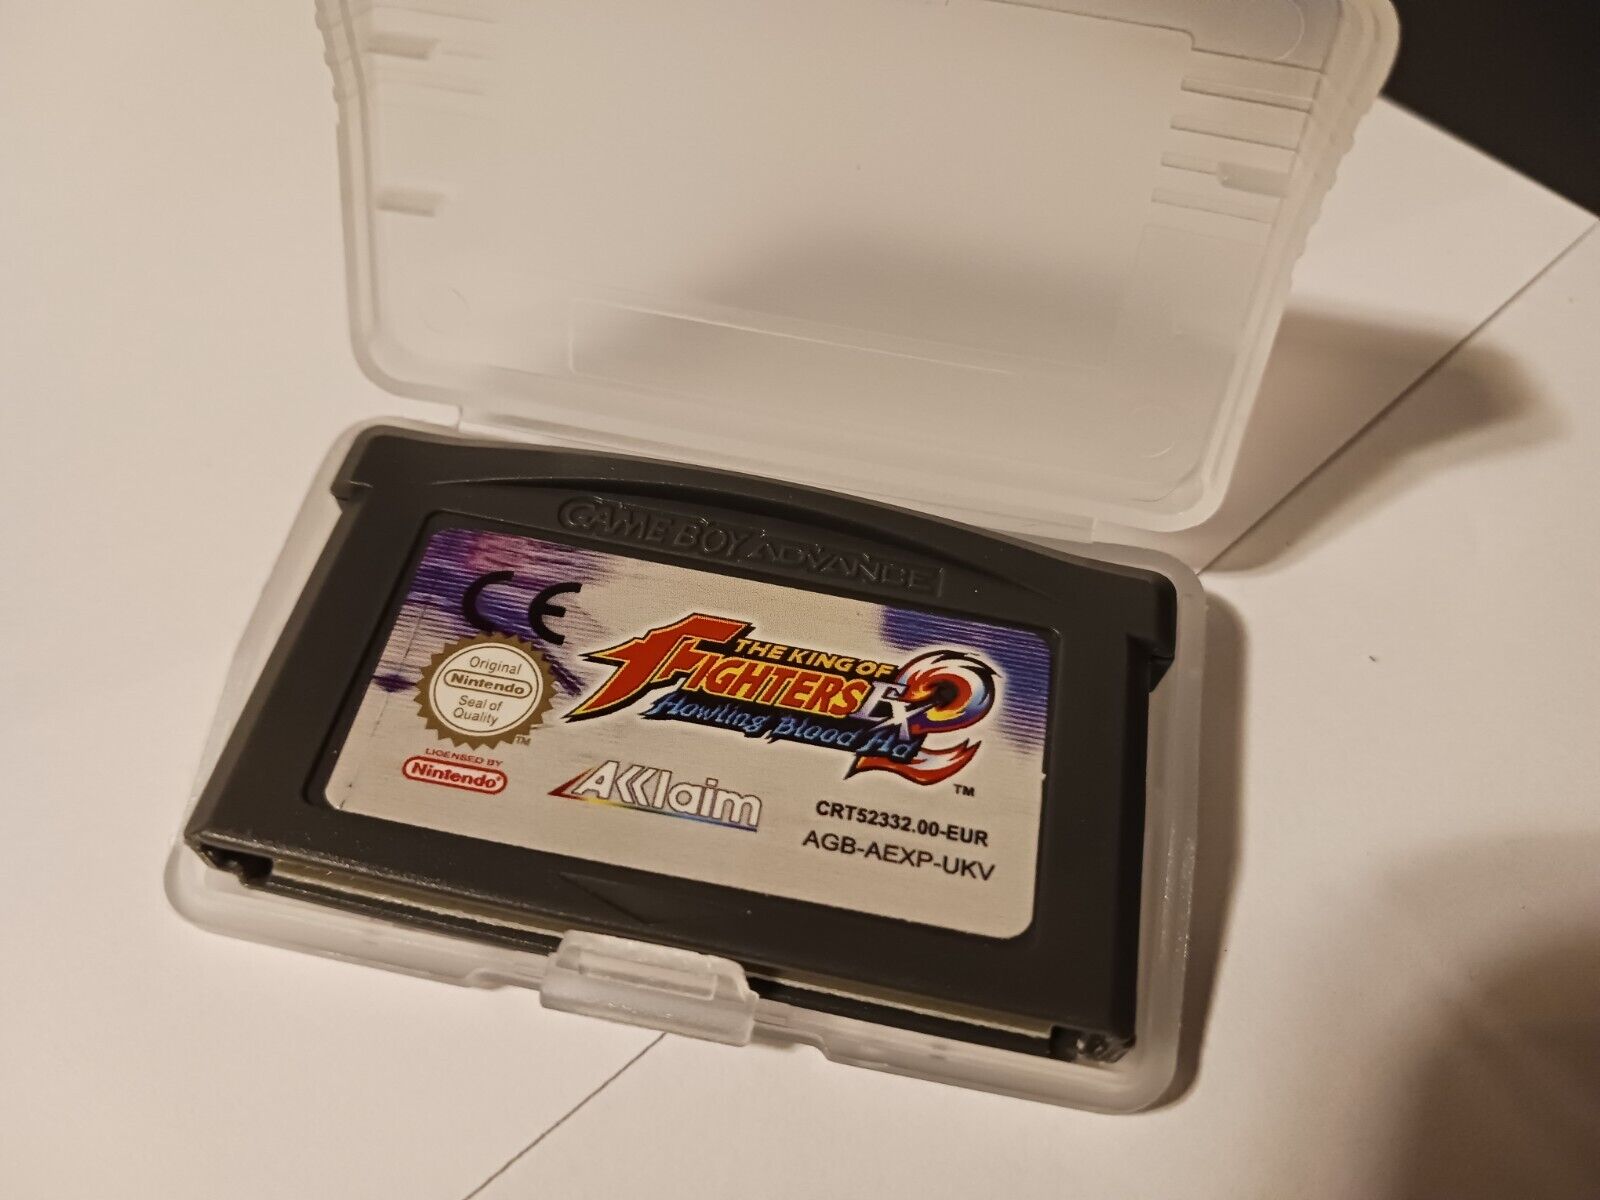 King Of Fighters Howling Blood Nintendo Game Boy Advance Tested Great Condition